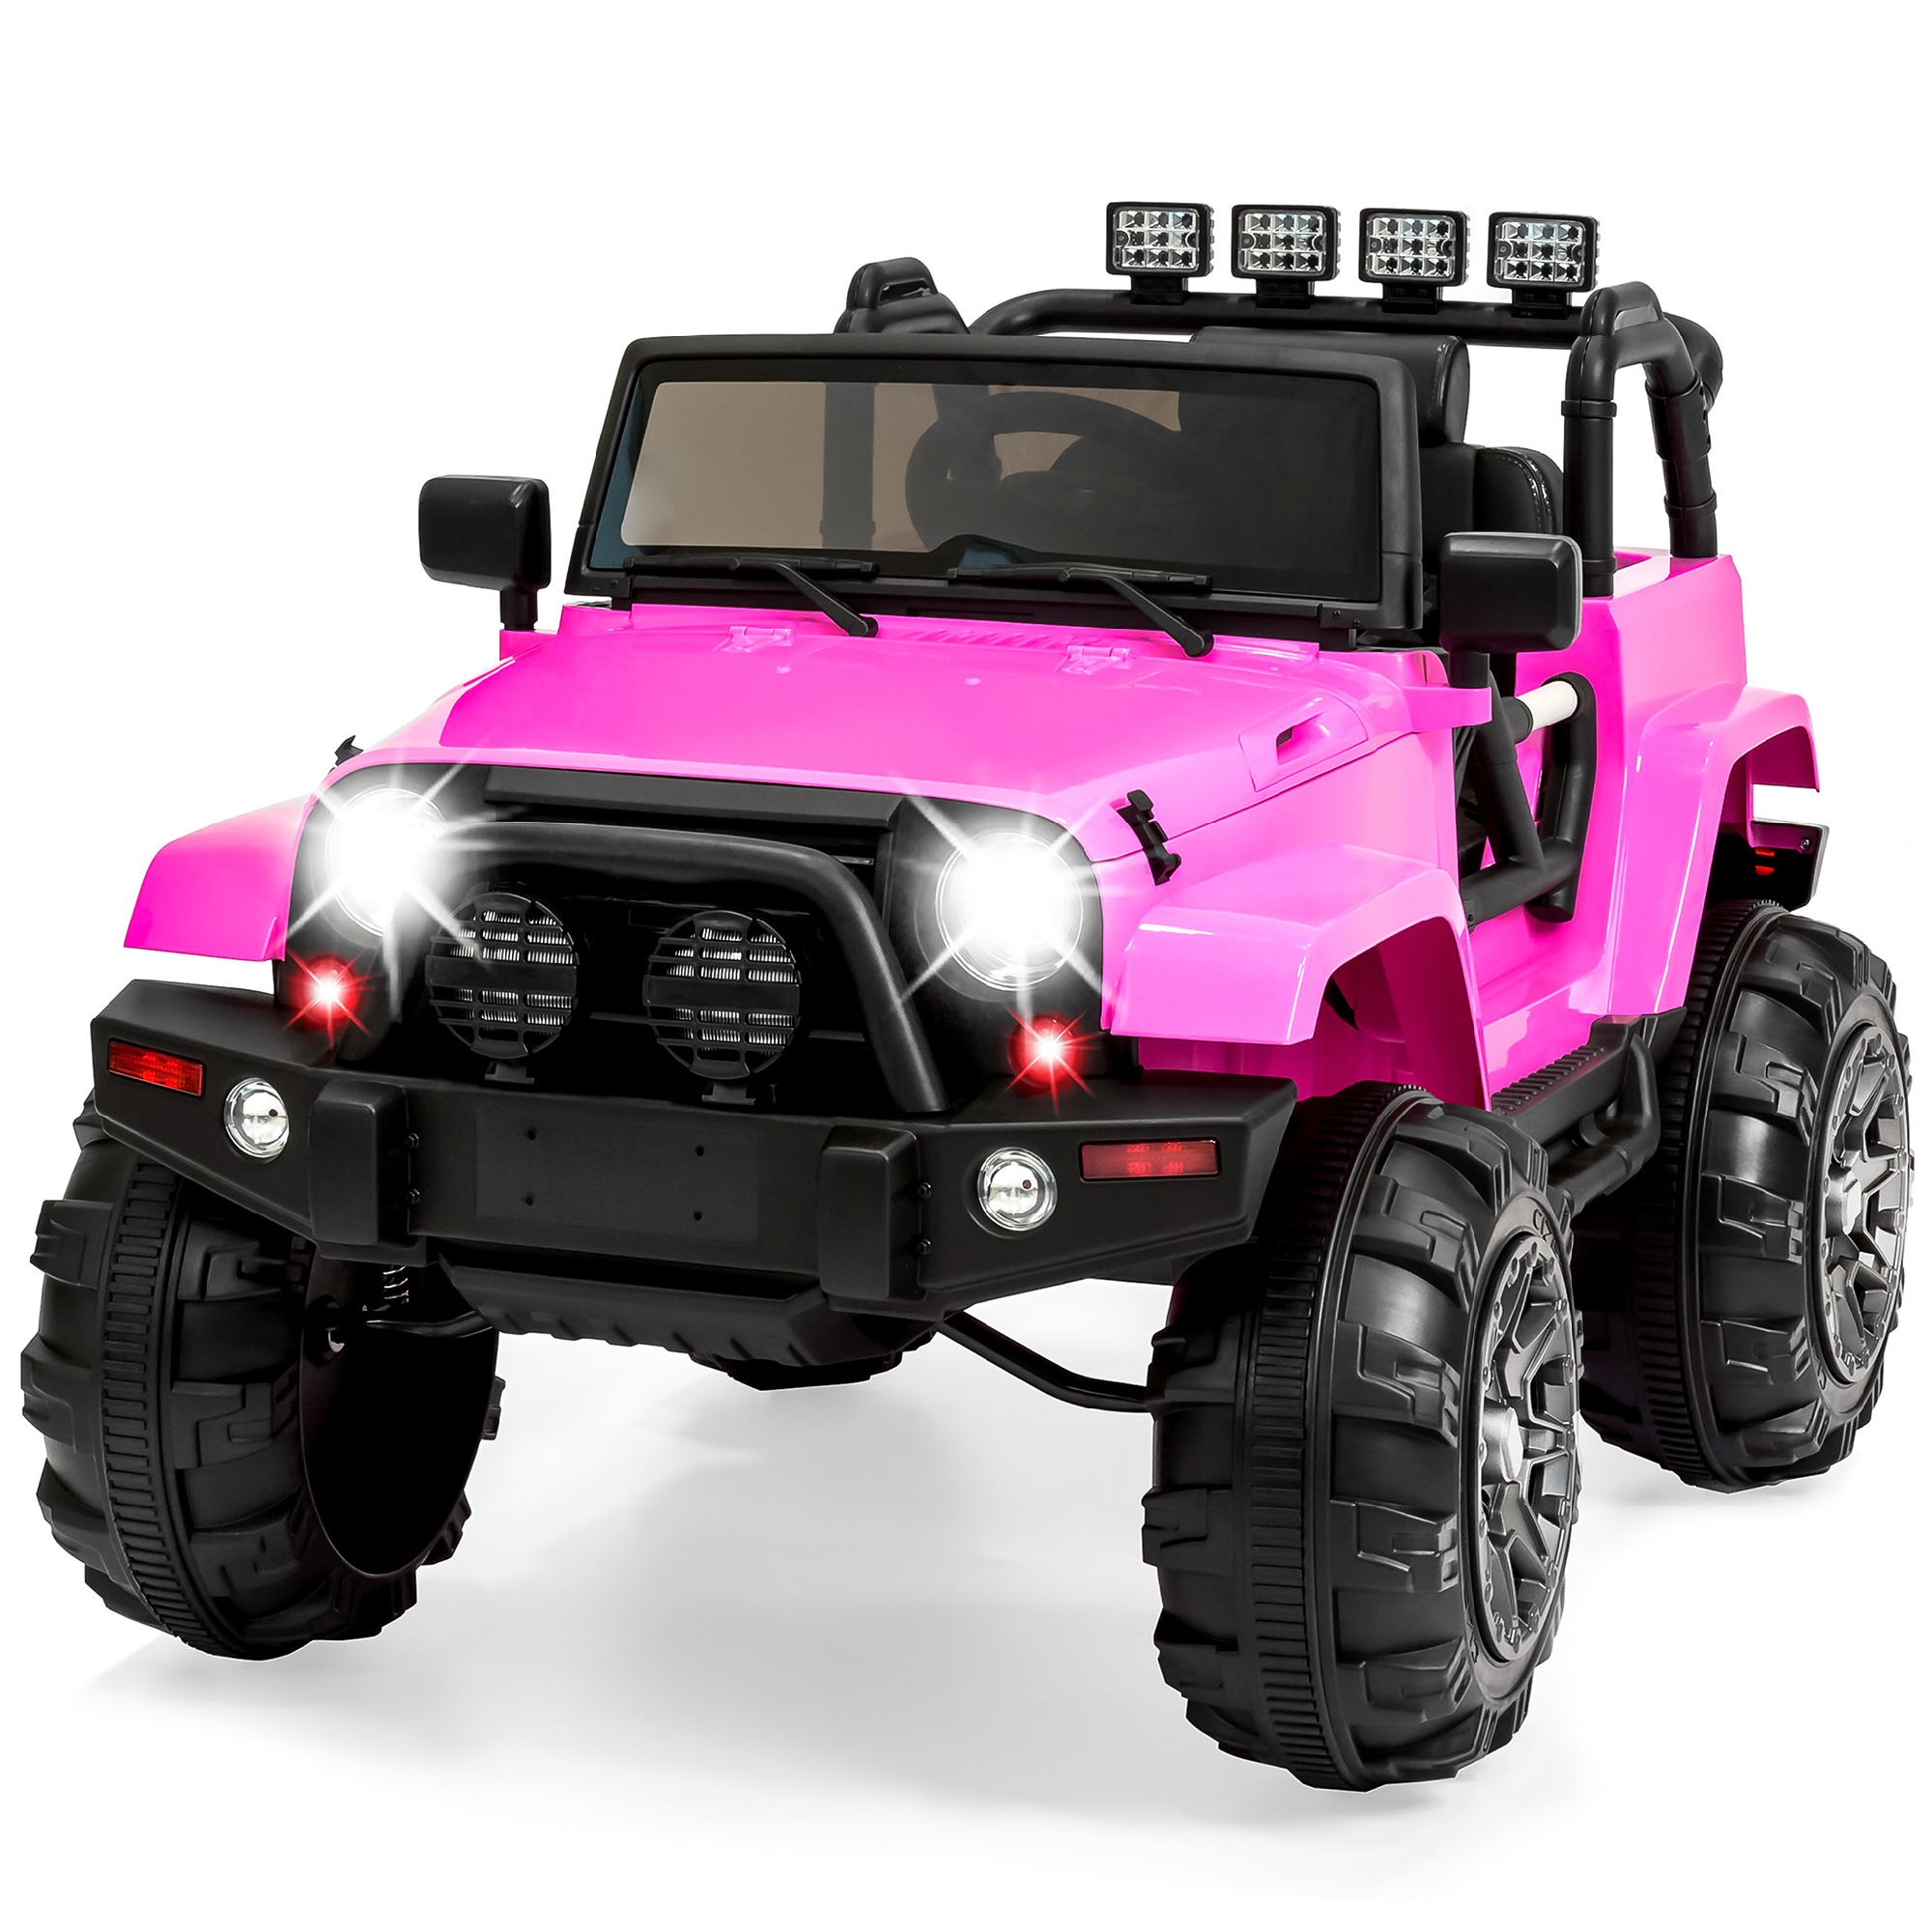 Best Choice Products 12V Kids Ride On Truck Car w/ Remote Control, Spring Suspension, Bluetooth, LED Lights - Pink - image 1 of 9